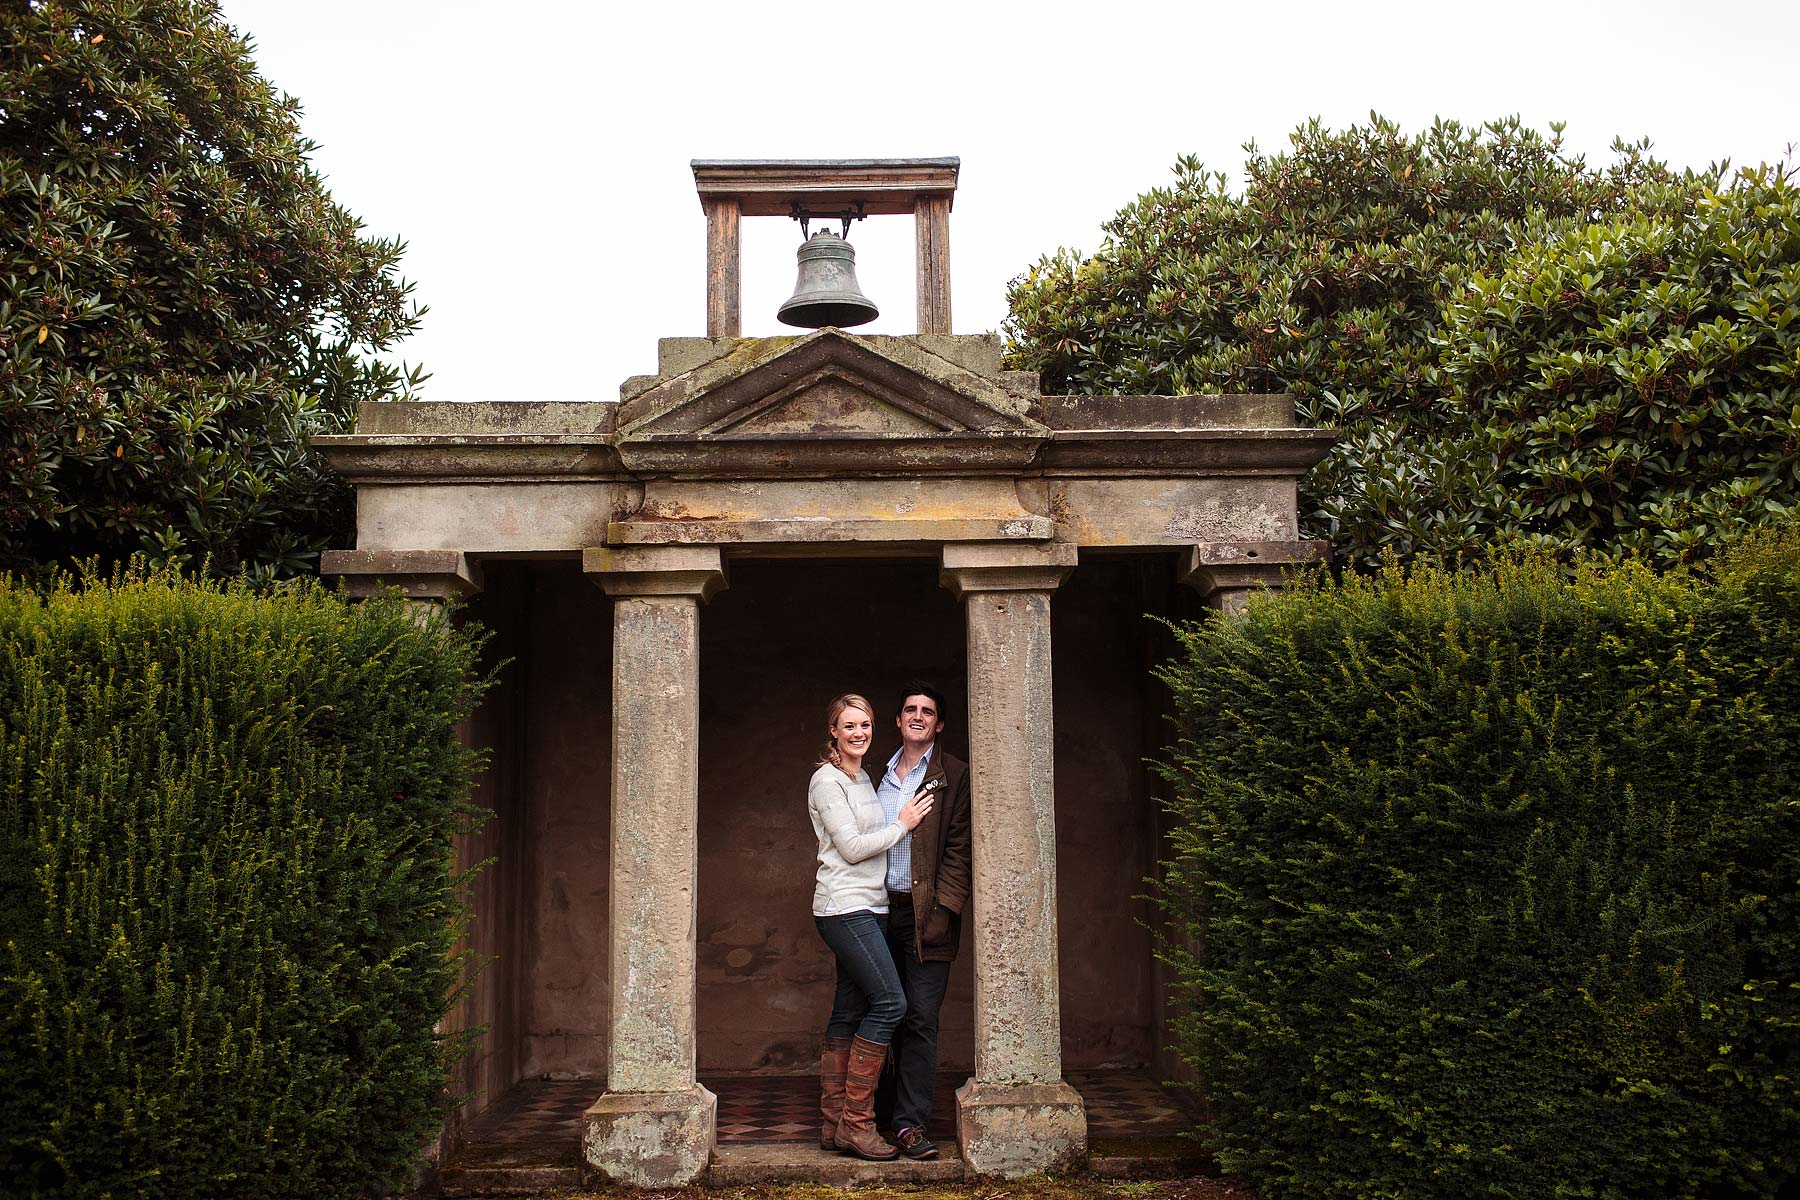 Beautiful choice for their engagement portrait session with photographs at Sandon Hall in Stafford by Sandon Hall Recommended Reportage Wedding Photographer Stuart James